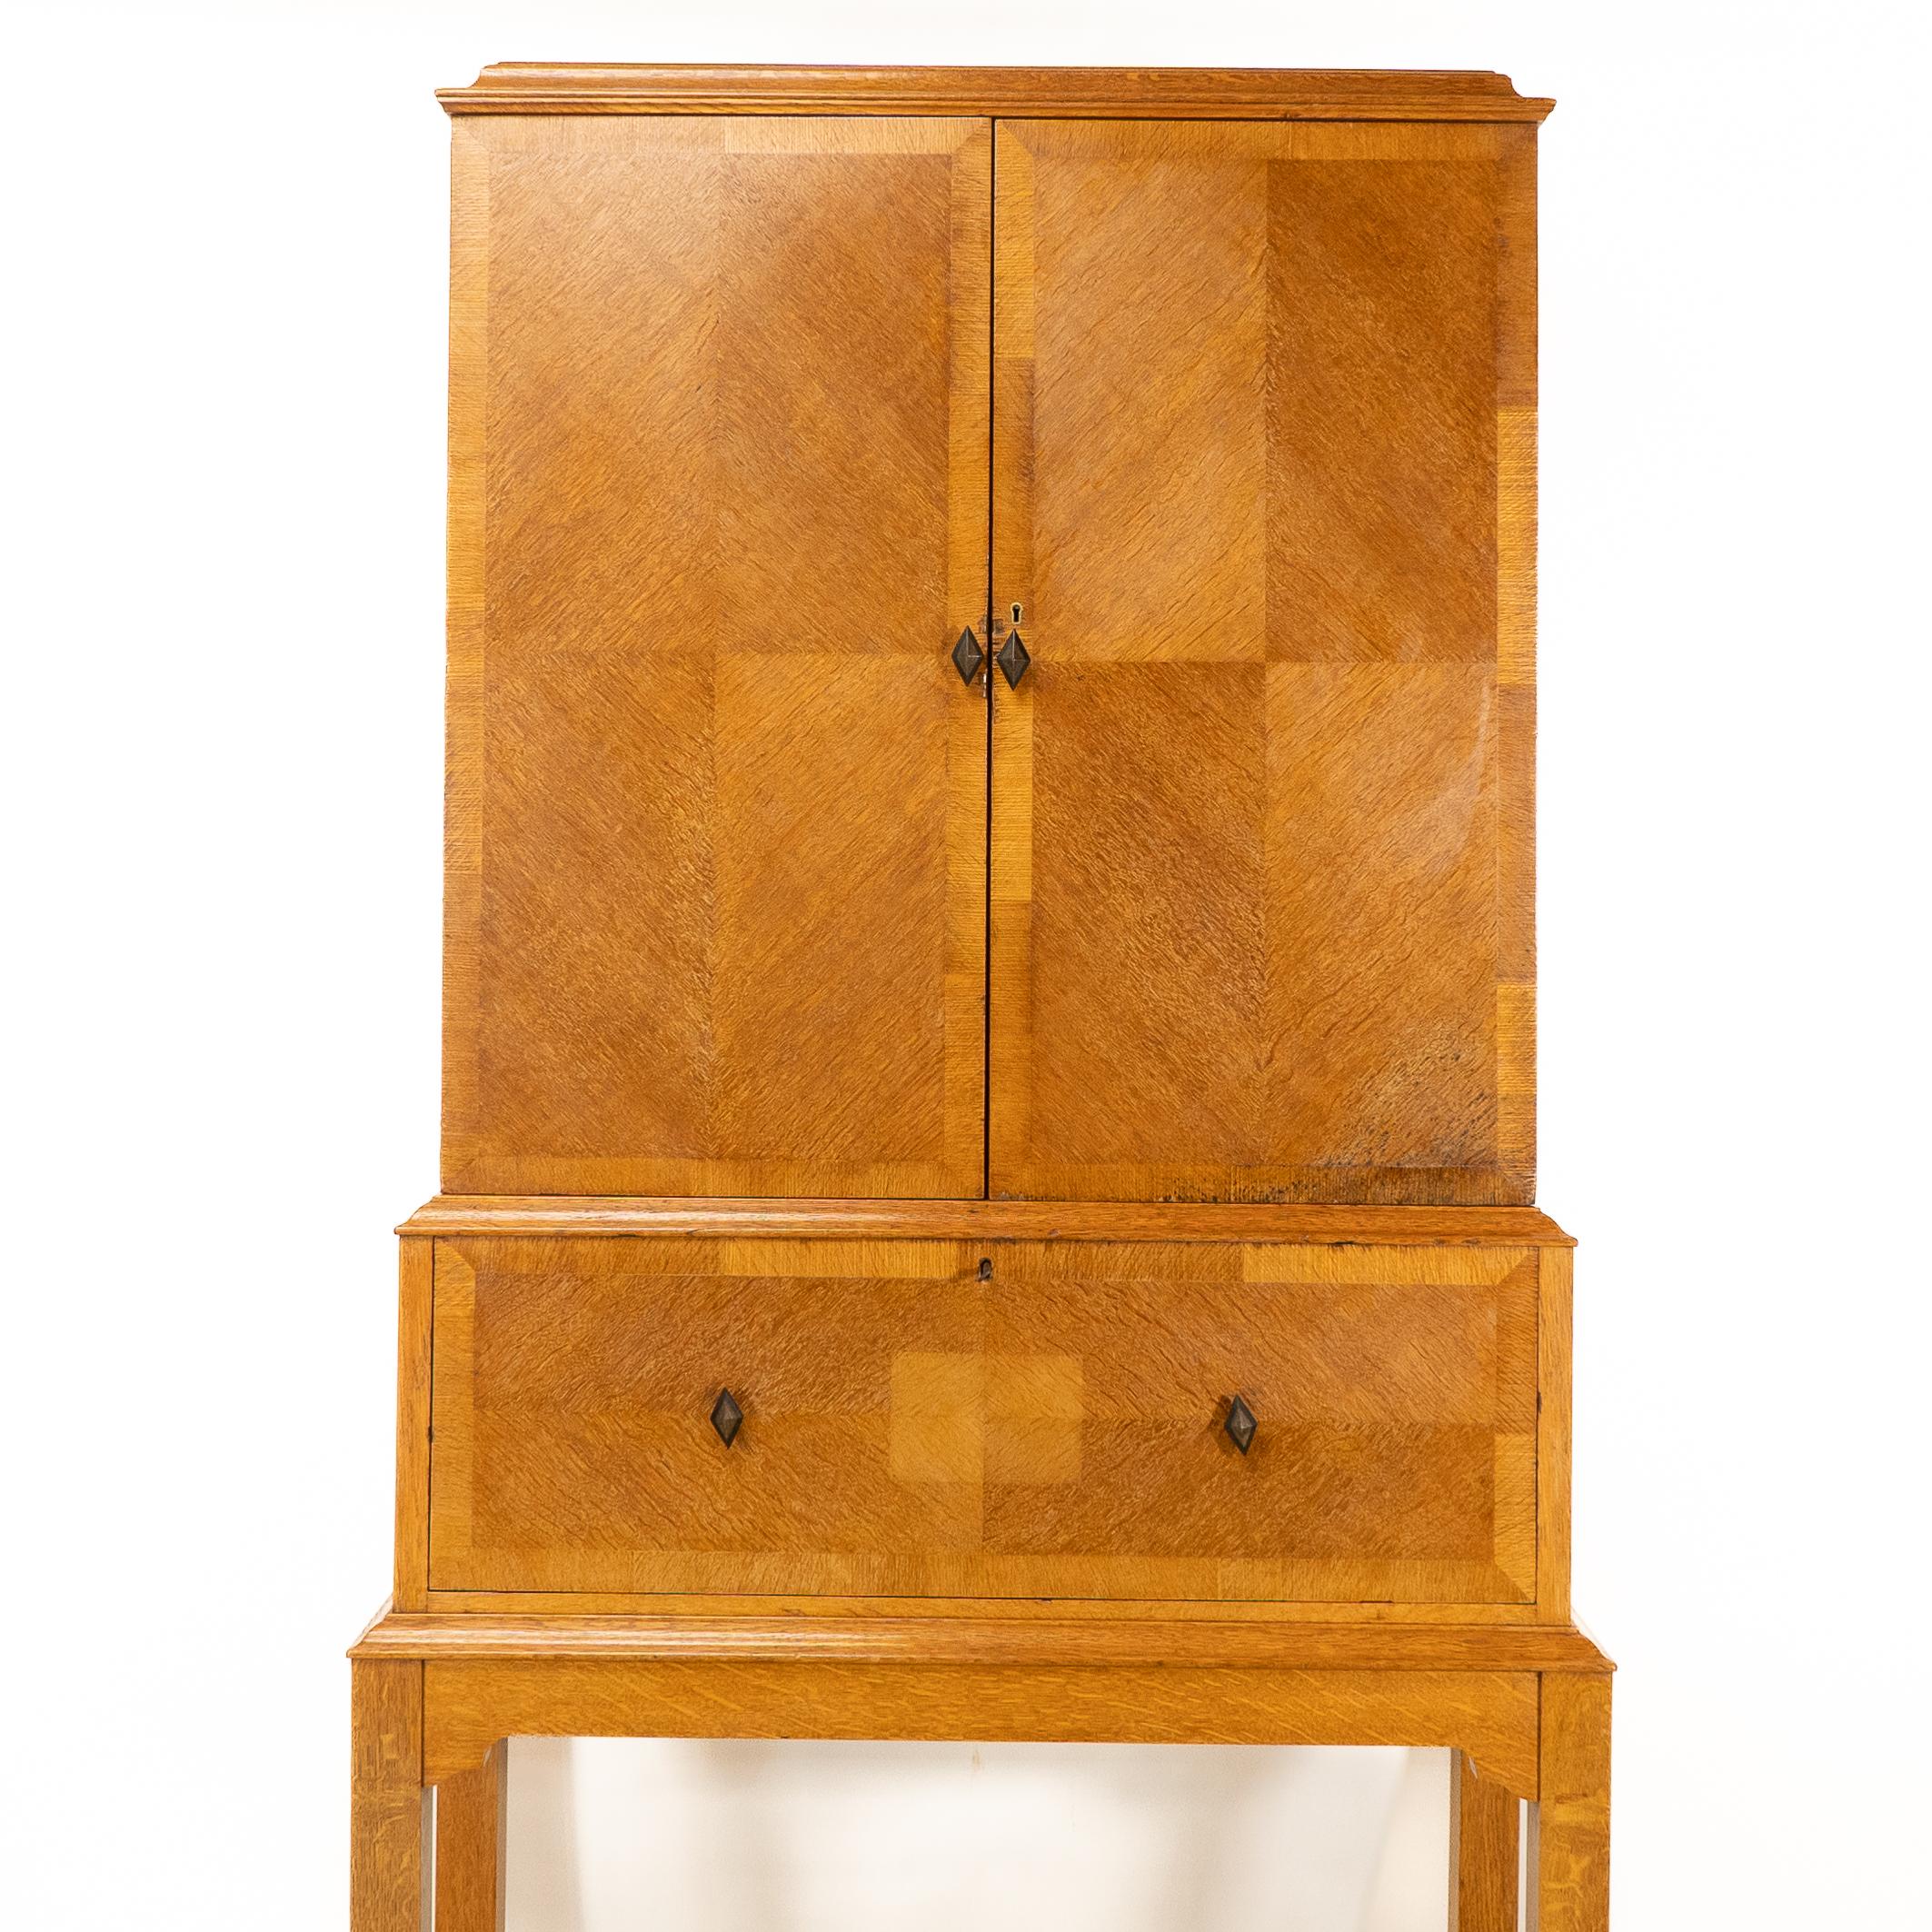 English Charles Spooner Arts & Crafts Oak secretaire Cabinet with Serpentine Stretchers For Sale